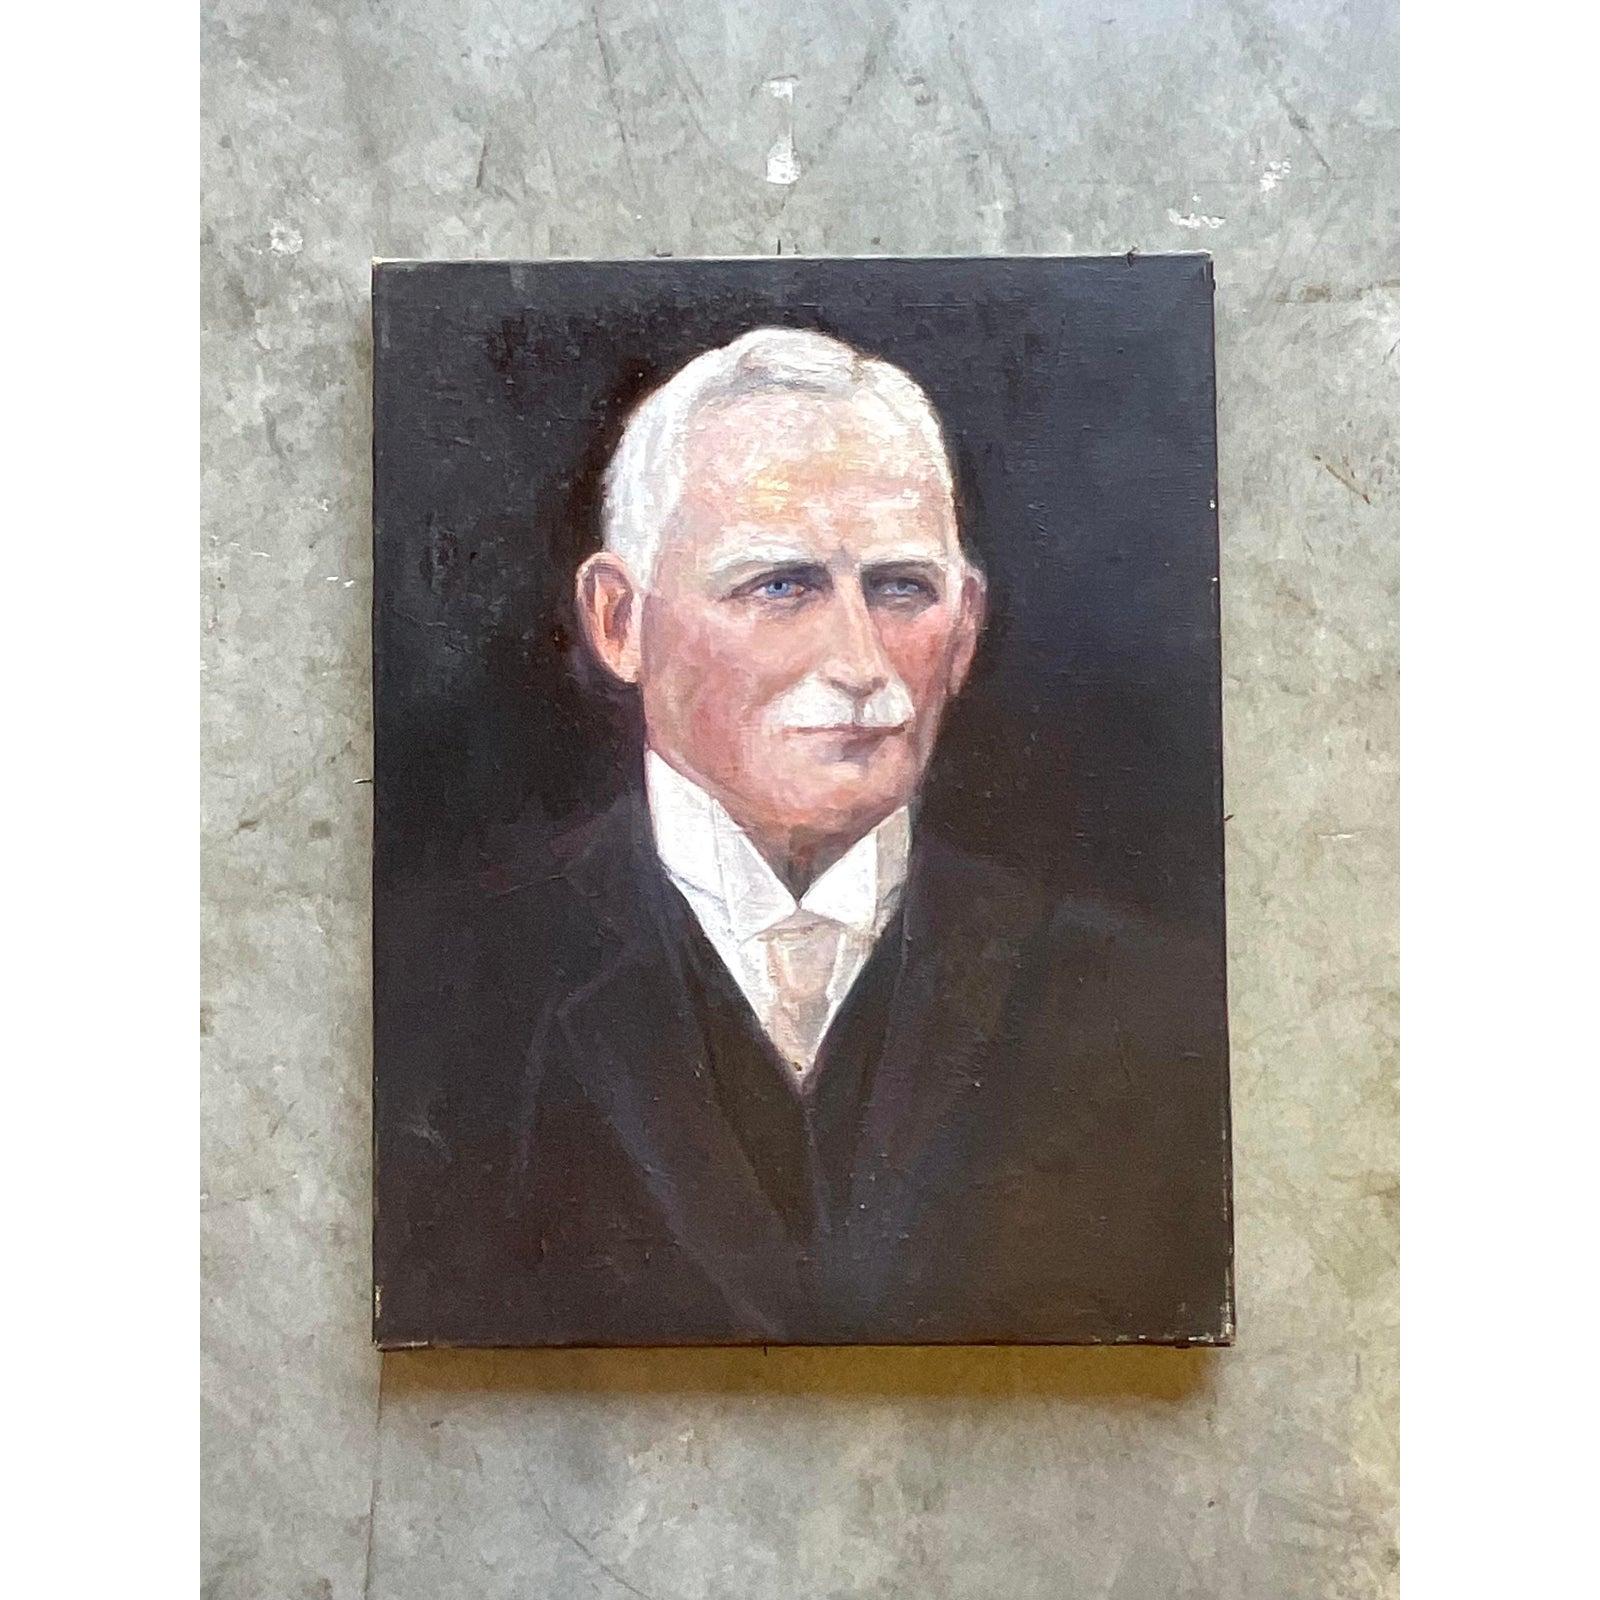 A fantastic vintage original oil portrait. Signed by the artist Whitney on the back. A dashing silver haired older gentleman in full formal dress. Acquired from a Palm Beach estate.